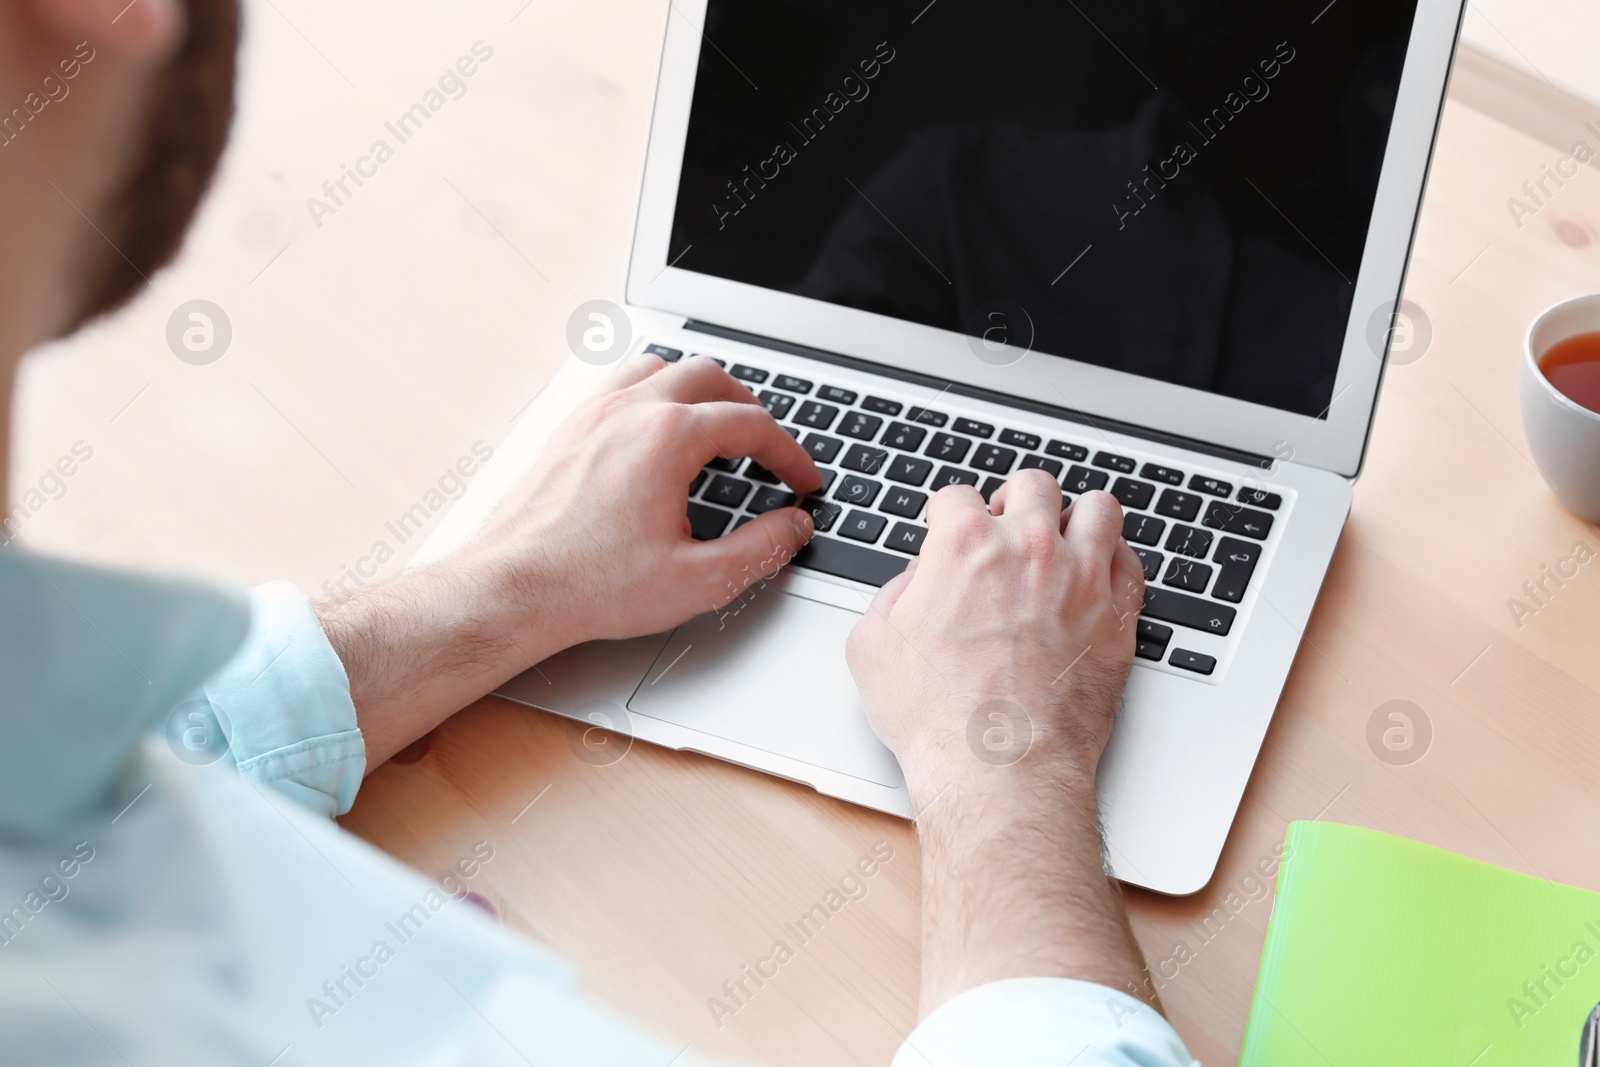 Photo of Young man working with laptop at desk. Home office